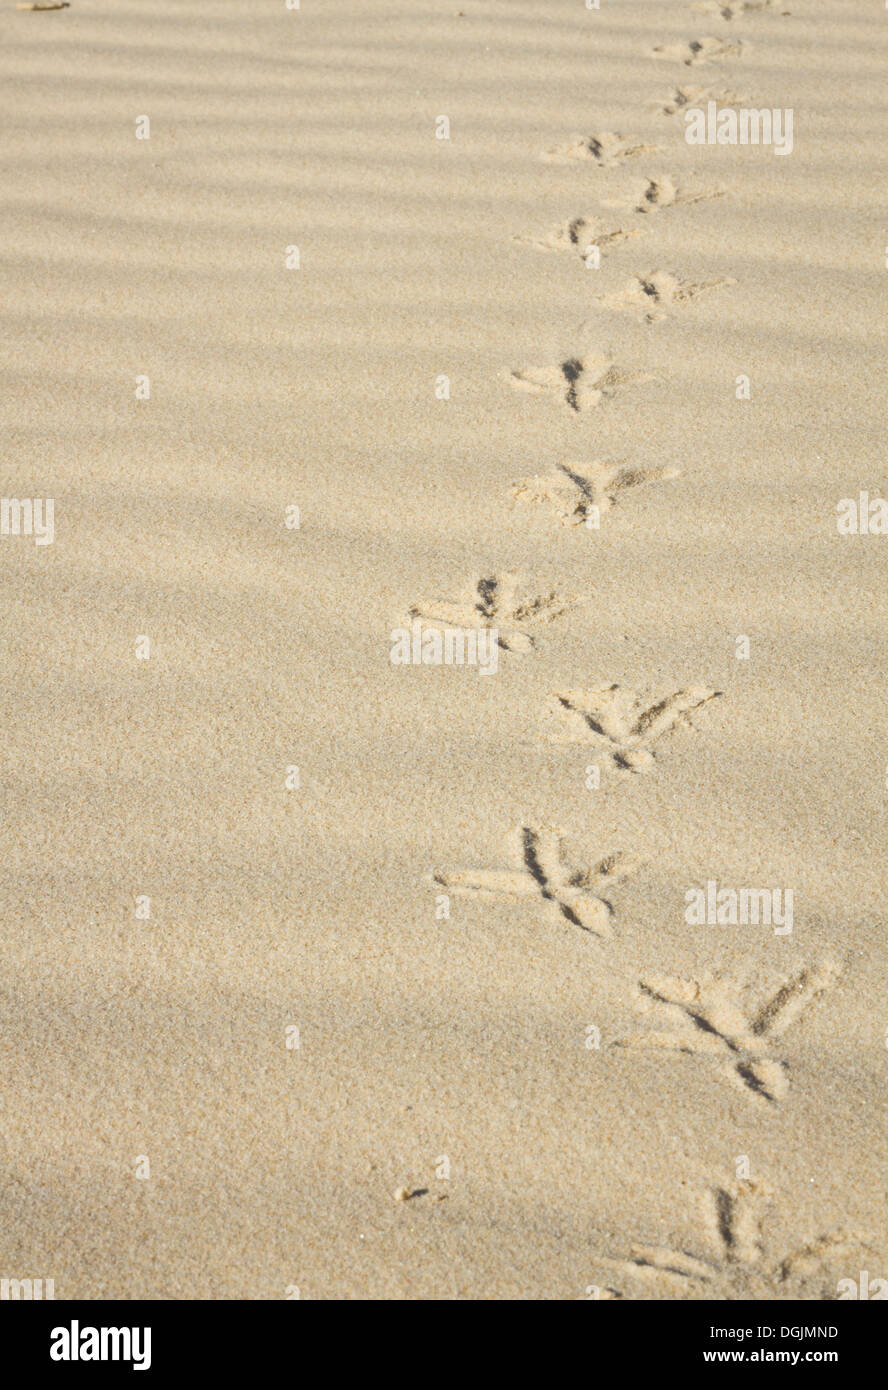 footprints in the sand of a bird Stock Photo